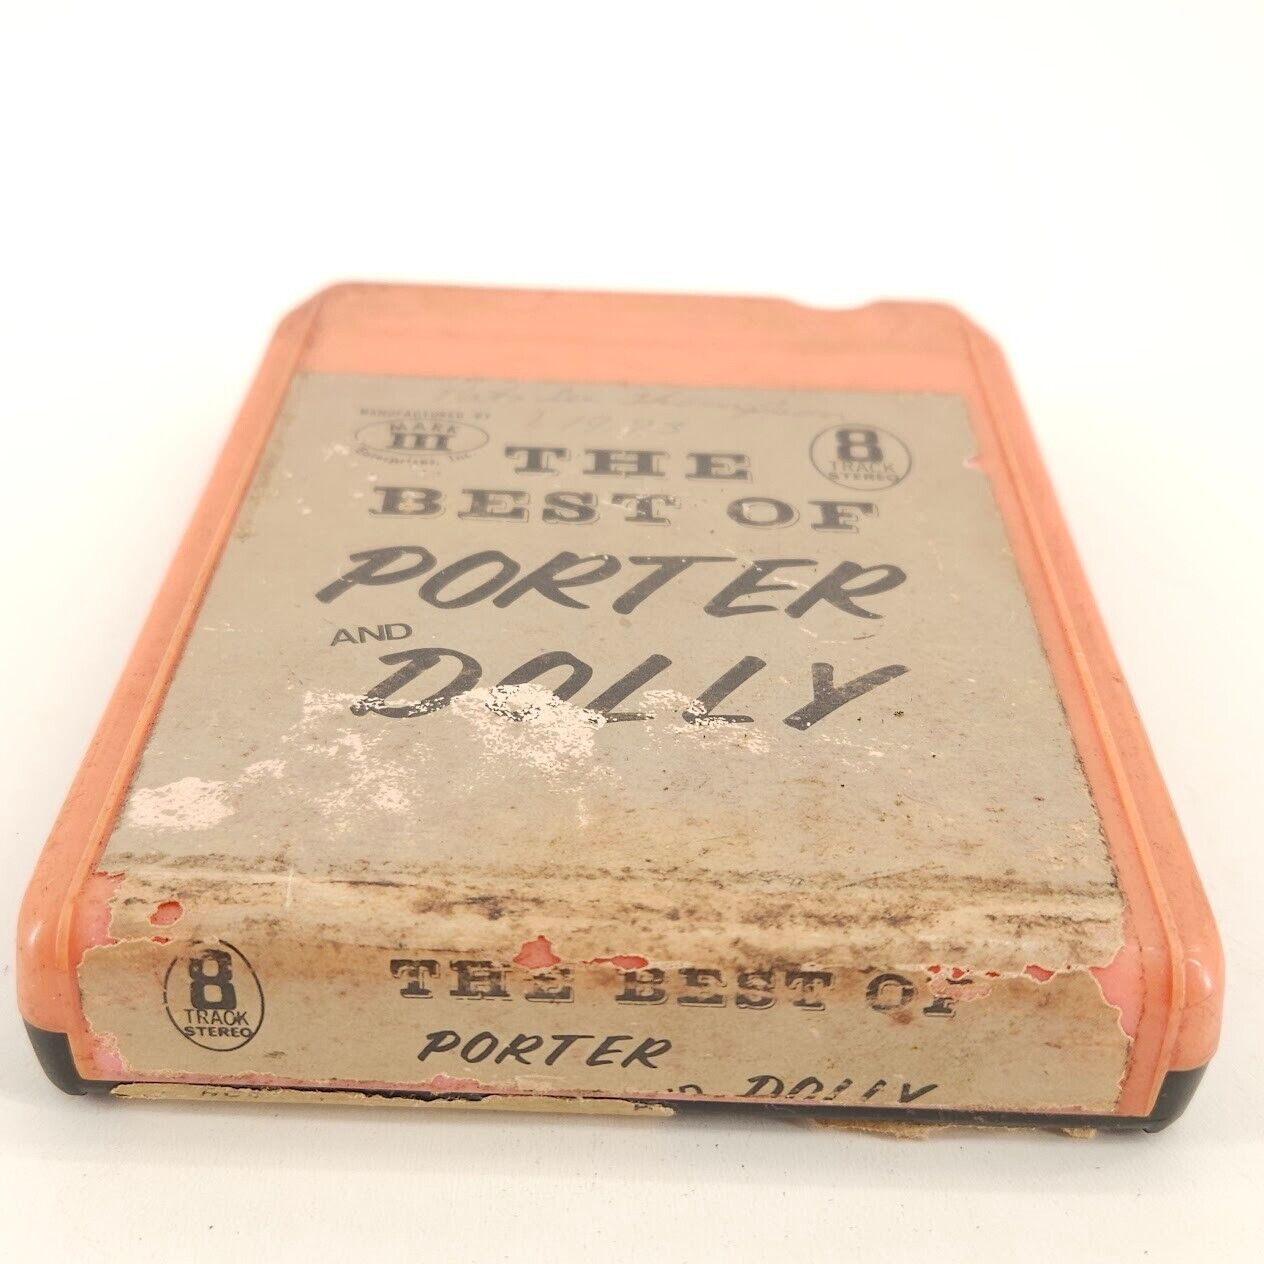 The Best Of Porter and Dolly 8 Track Tape